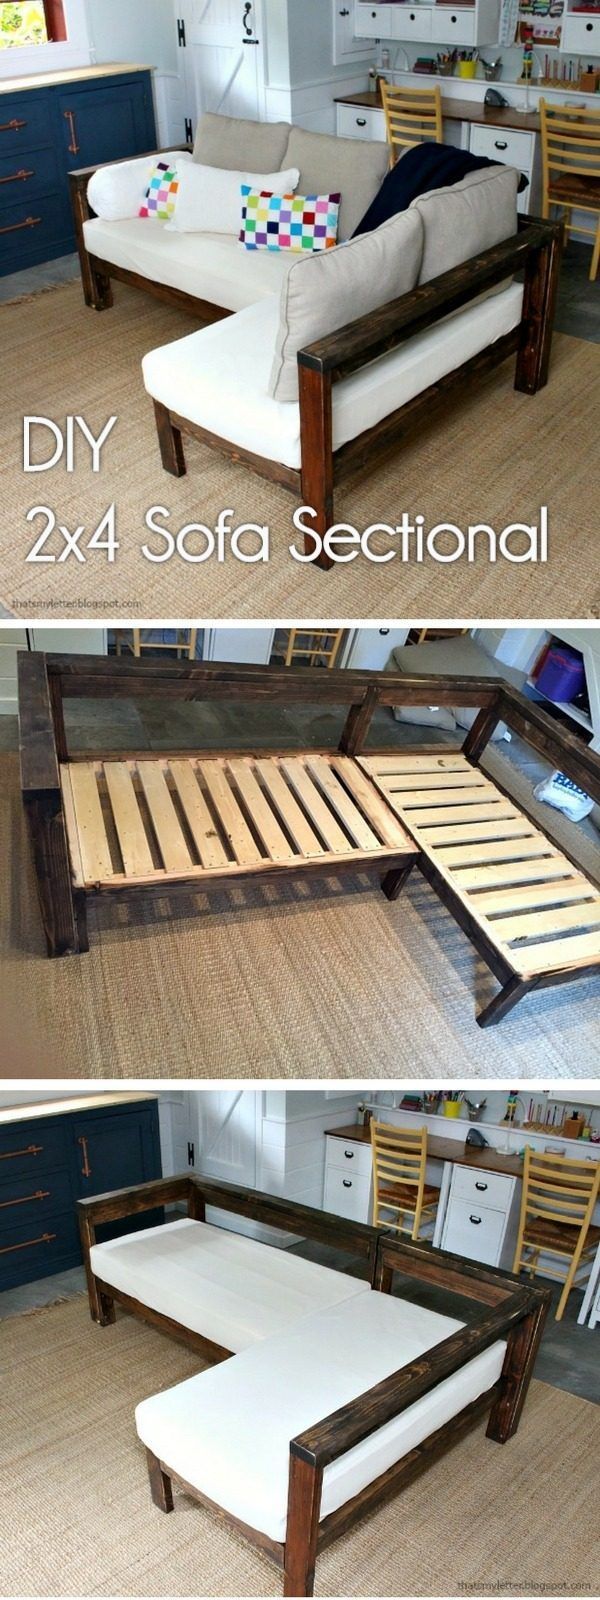 20 Easy DIY 2x4 Wood Projects You Can Make Even from Scrap -   23 diy projects Decoration how to make
 ideas